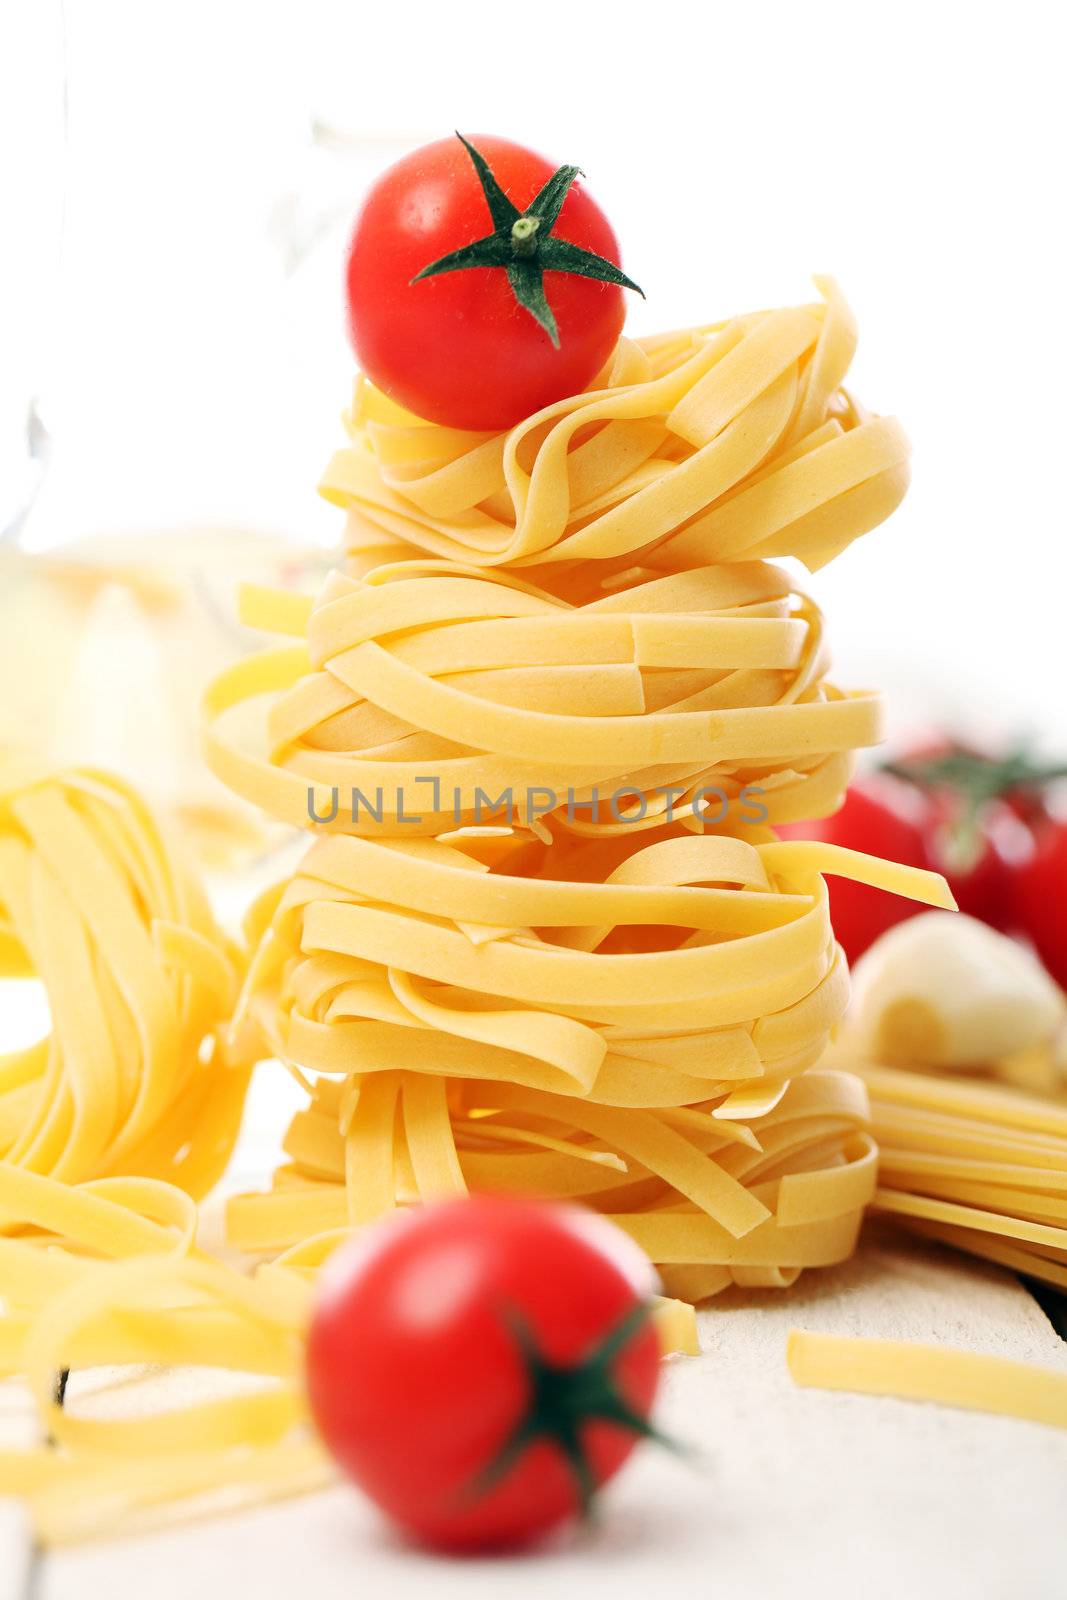 Italian pasta and cherry tomato on wooden surface isolated on a white background